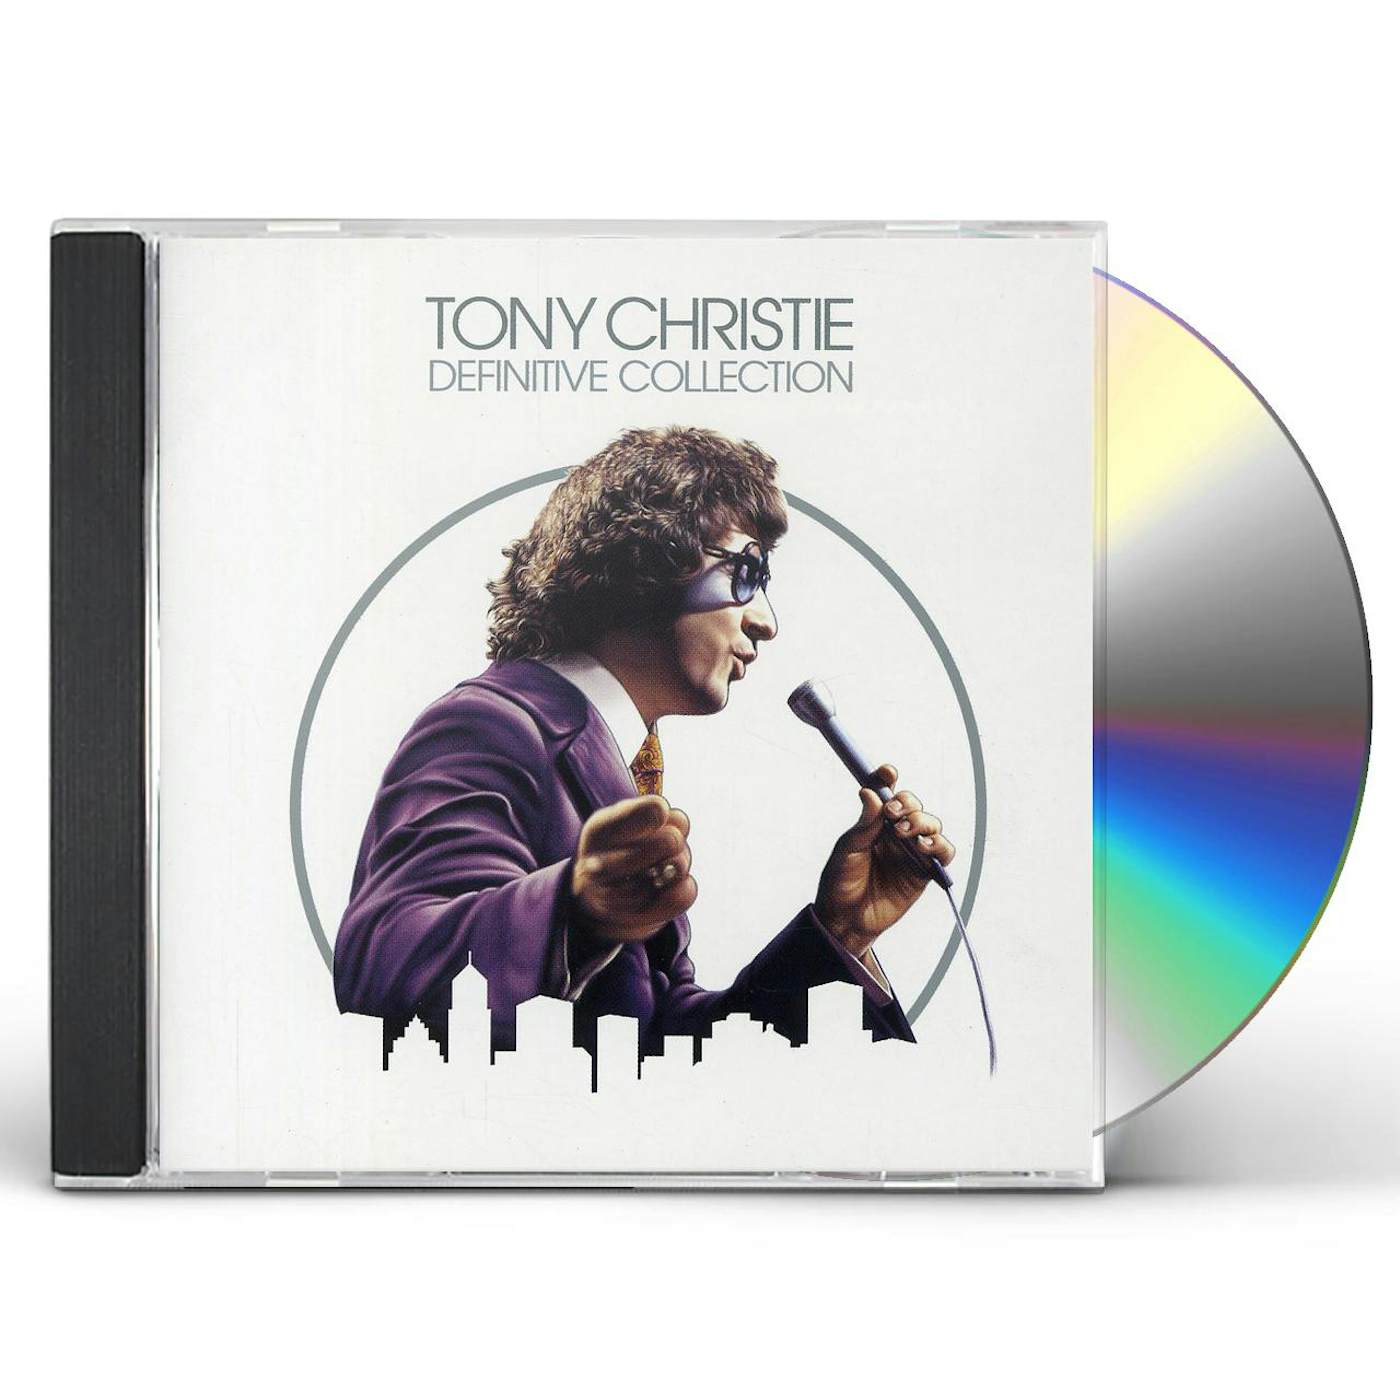 Tony Christie DEFINITIVE COLLECTION CD